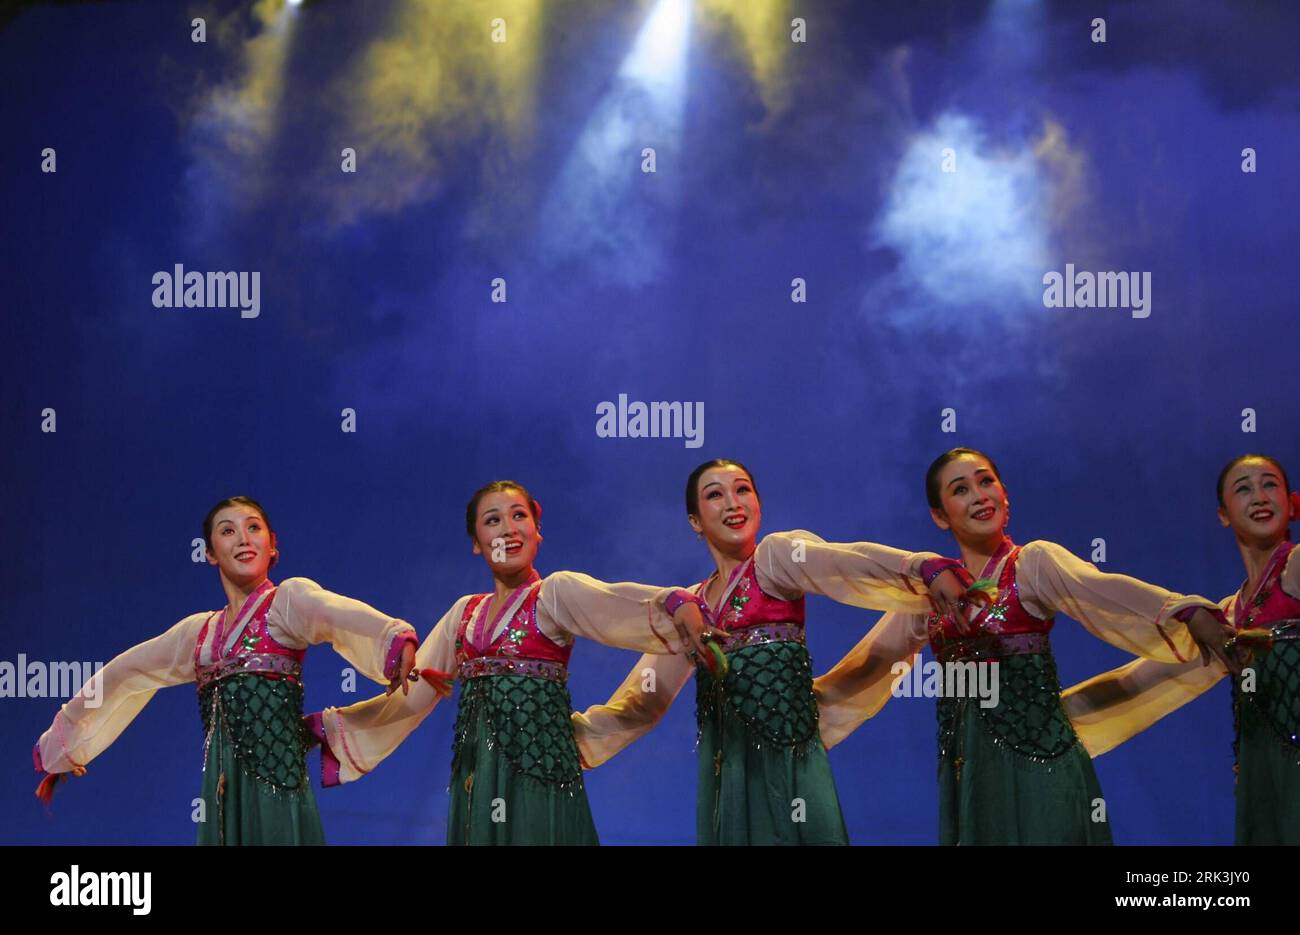 Bildnummer: 53523275  Datum: 10.10.2009  Copyright: imago/Xinhua (091011) -- WENZHOU, Oct. 11, 2009 (Xinhua) -- Dancers of the Pyongyang Art Troupe of the Democratic  s Republic of Korea (DPRK) perform at the Dongnan Theater in Wenzhou, east China s Zhejiang Province, Oct. 10, 2009. More than 20 wonderful programs, including the long drum dance and fan dance, were shown to audiences of Wenzhou on Saturday. (Xinhua/Zheng Peng) (mcg) (2)CHINA-ZHEJIANG-WENZHOU-PERFORMANCE (CN) PUBLICATIONxNOTxINxCHN Musik Aktion Nordkorea kbdig xsk 2009 quer o0 Tanz    Bildnummer 53523275 Date 10 10 2009 Copyrigh Stock Photo